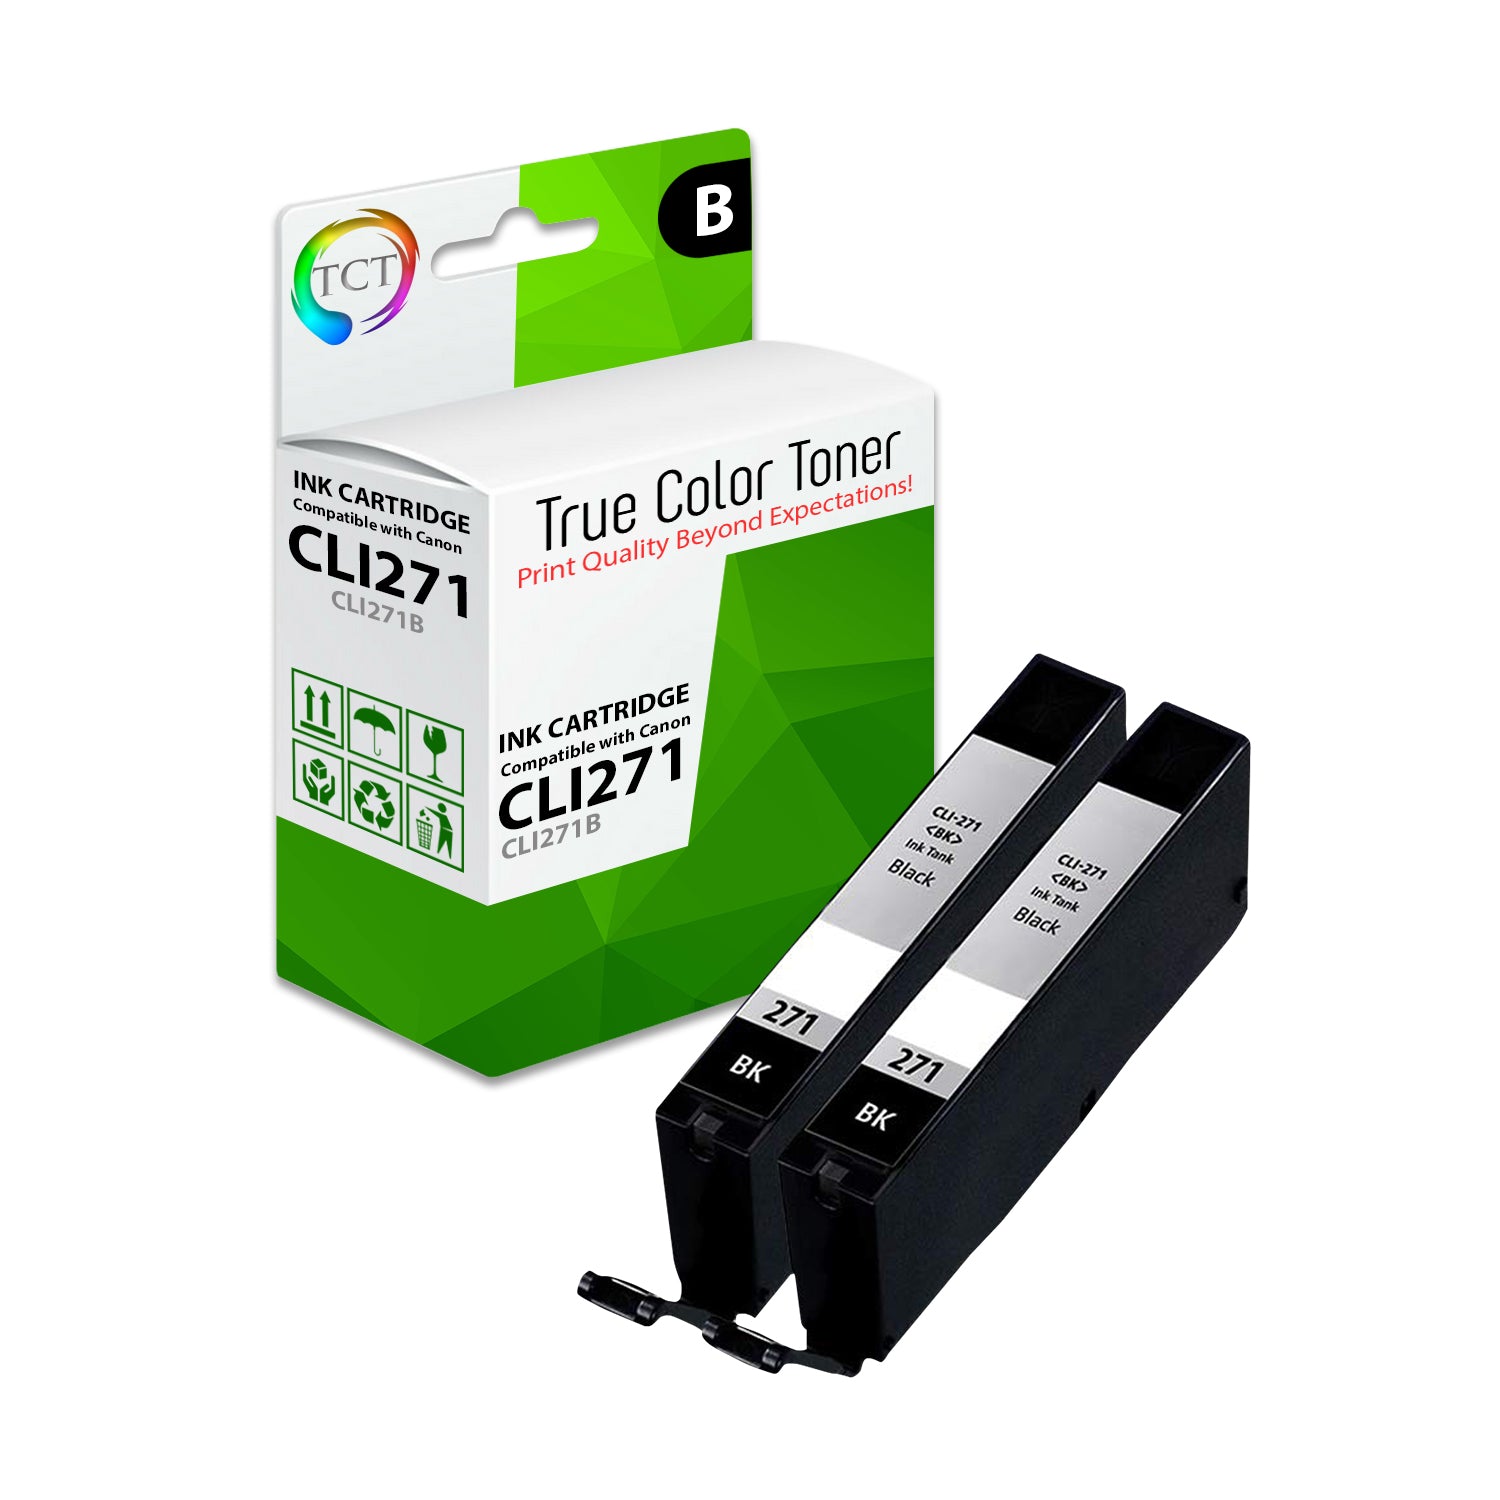 TCT Compatible Ink Cartridge Replacement for the Canon CLI-271 Series - 2 Pack Black